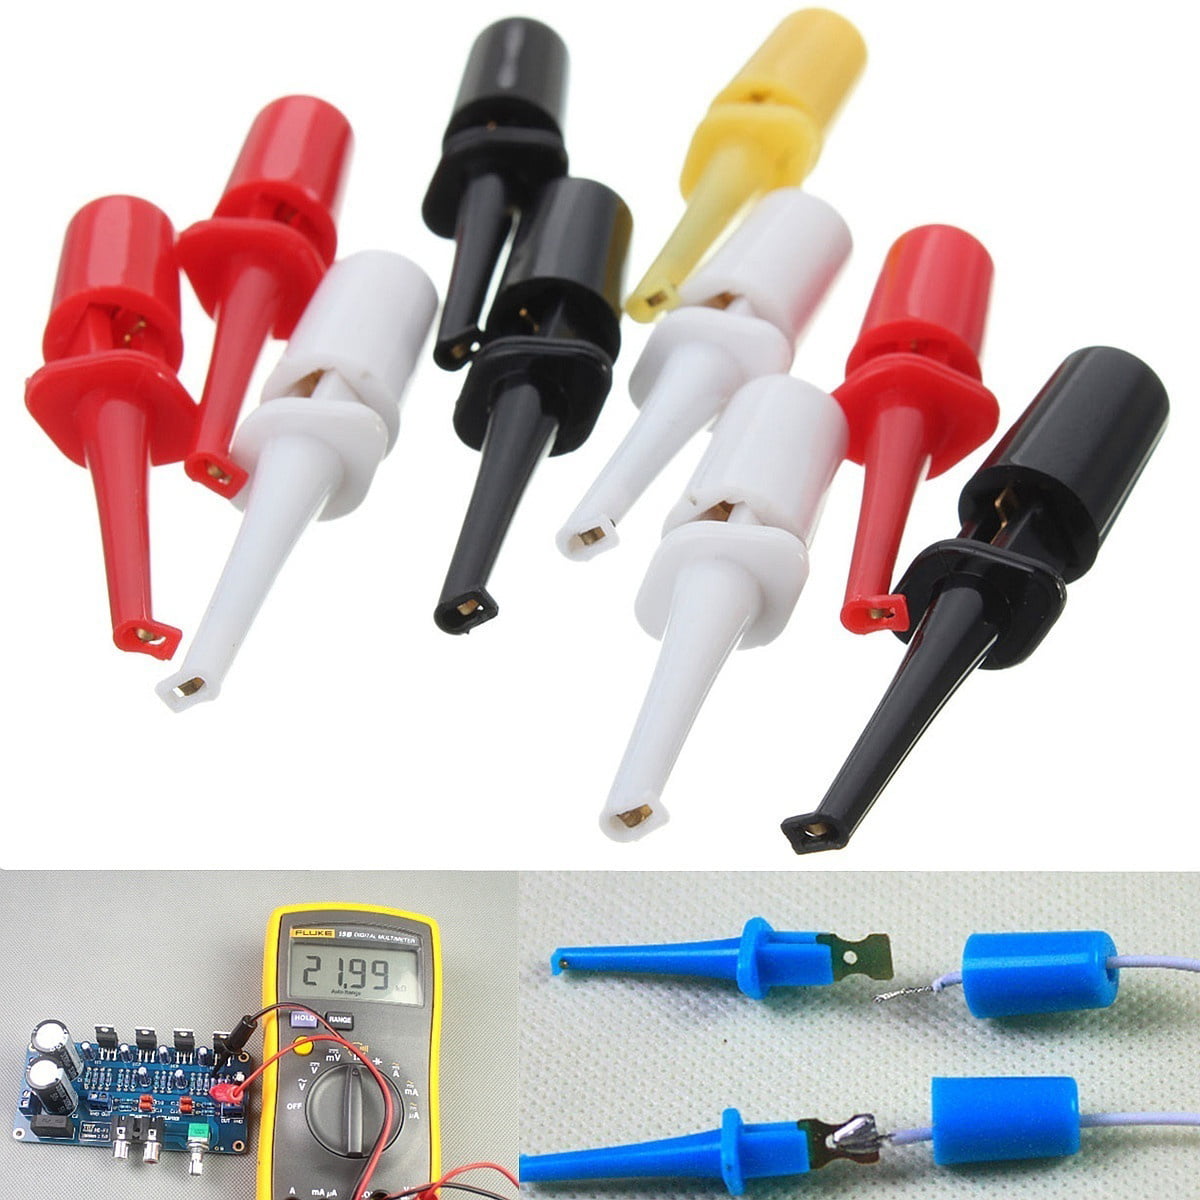 12x Useful multimeter lead wire test probe hook clip set grabbers connect`H4 